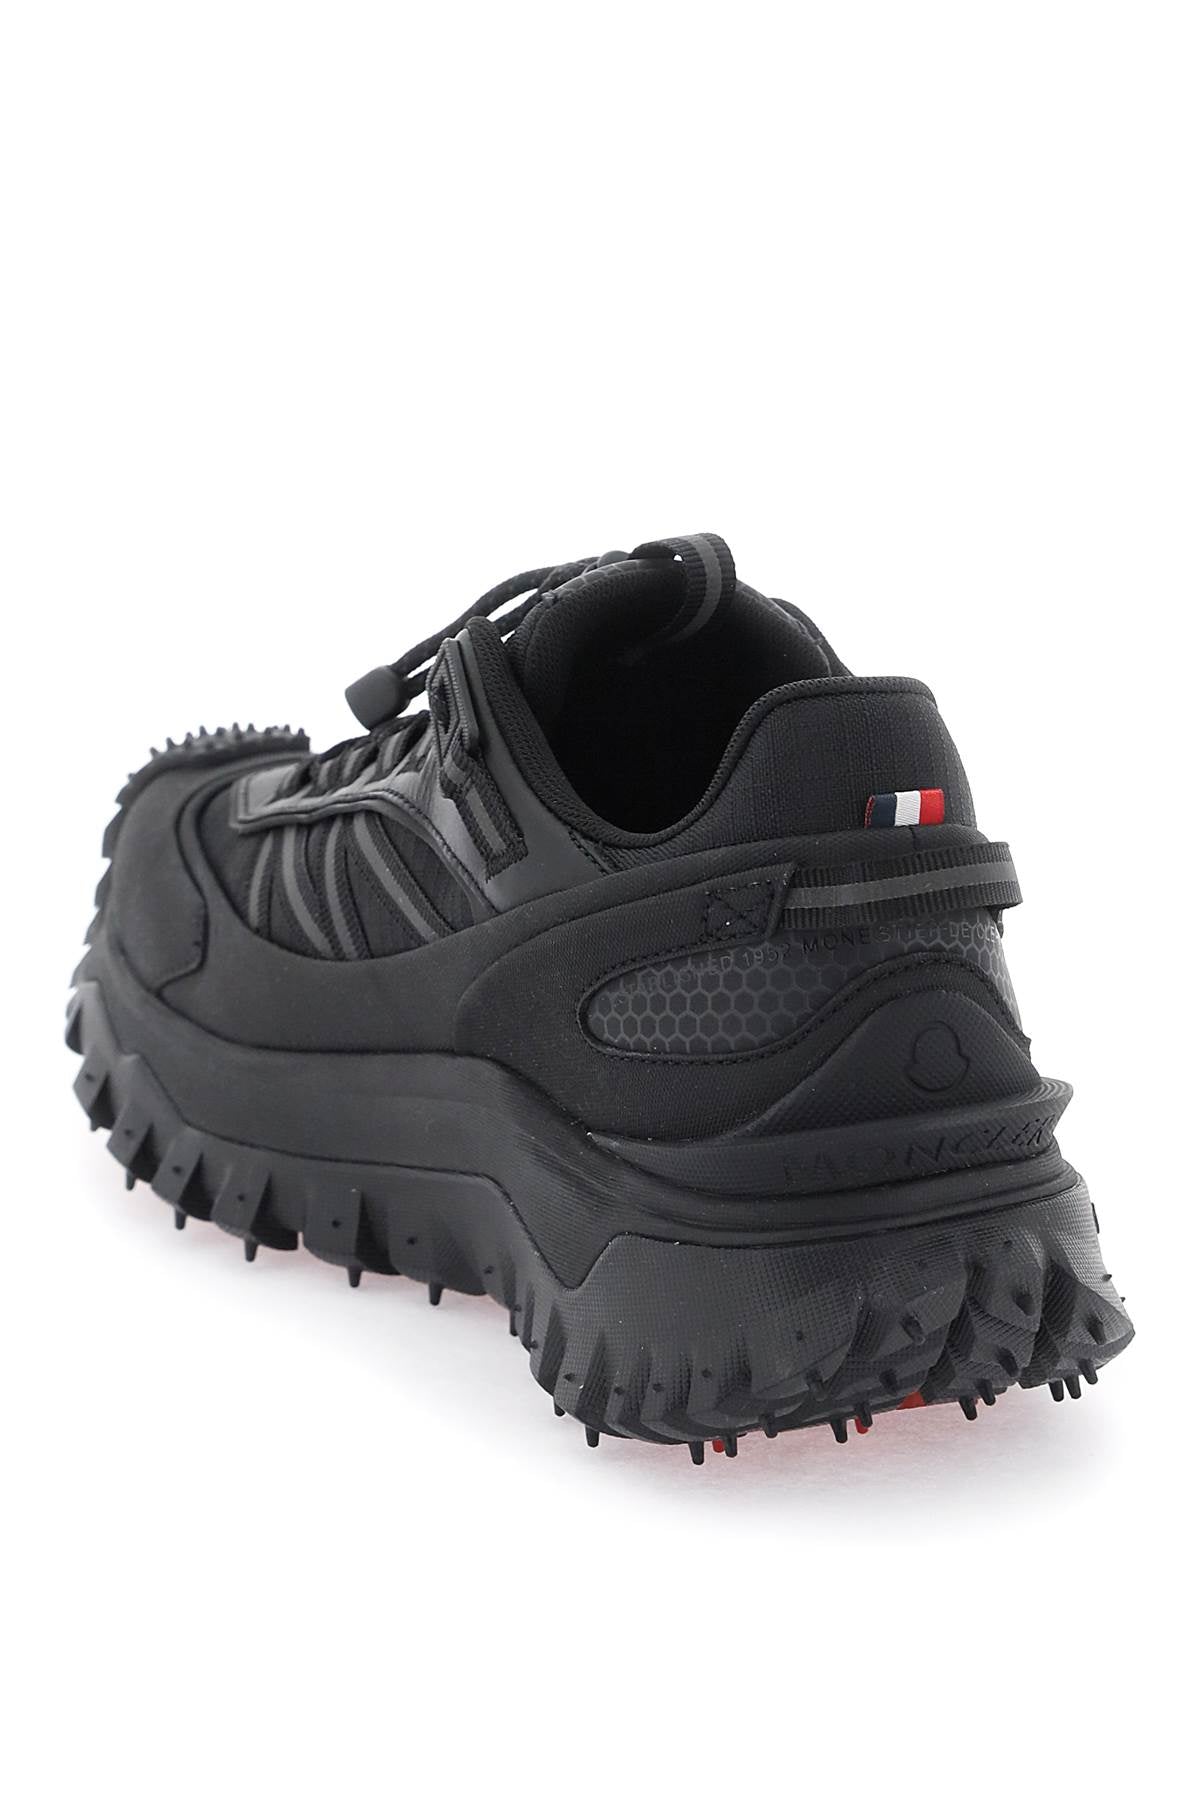 MONCLER Black Waterproof Trail Sneakers for Women - SS24 Collection